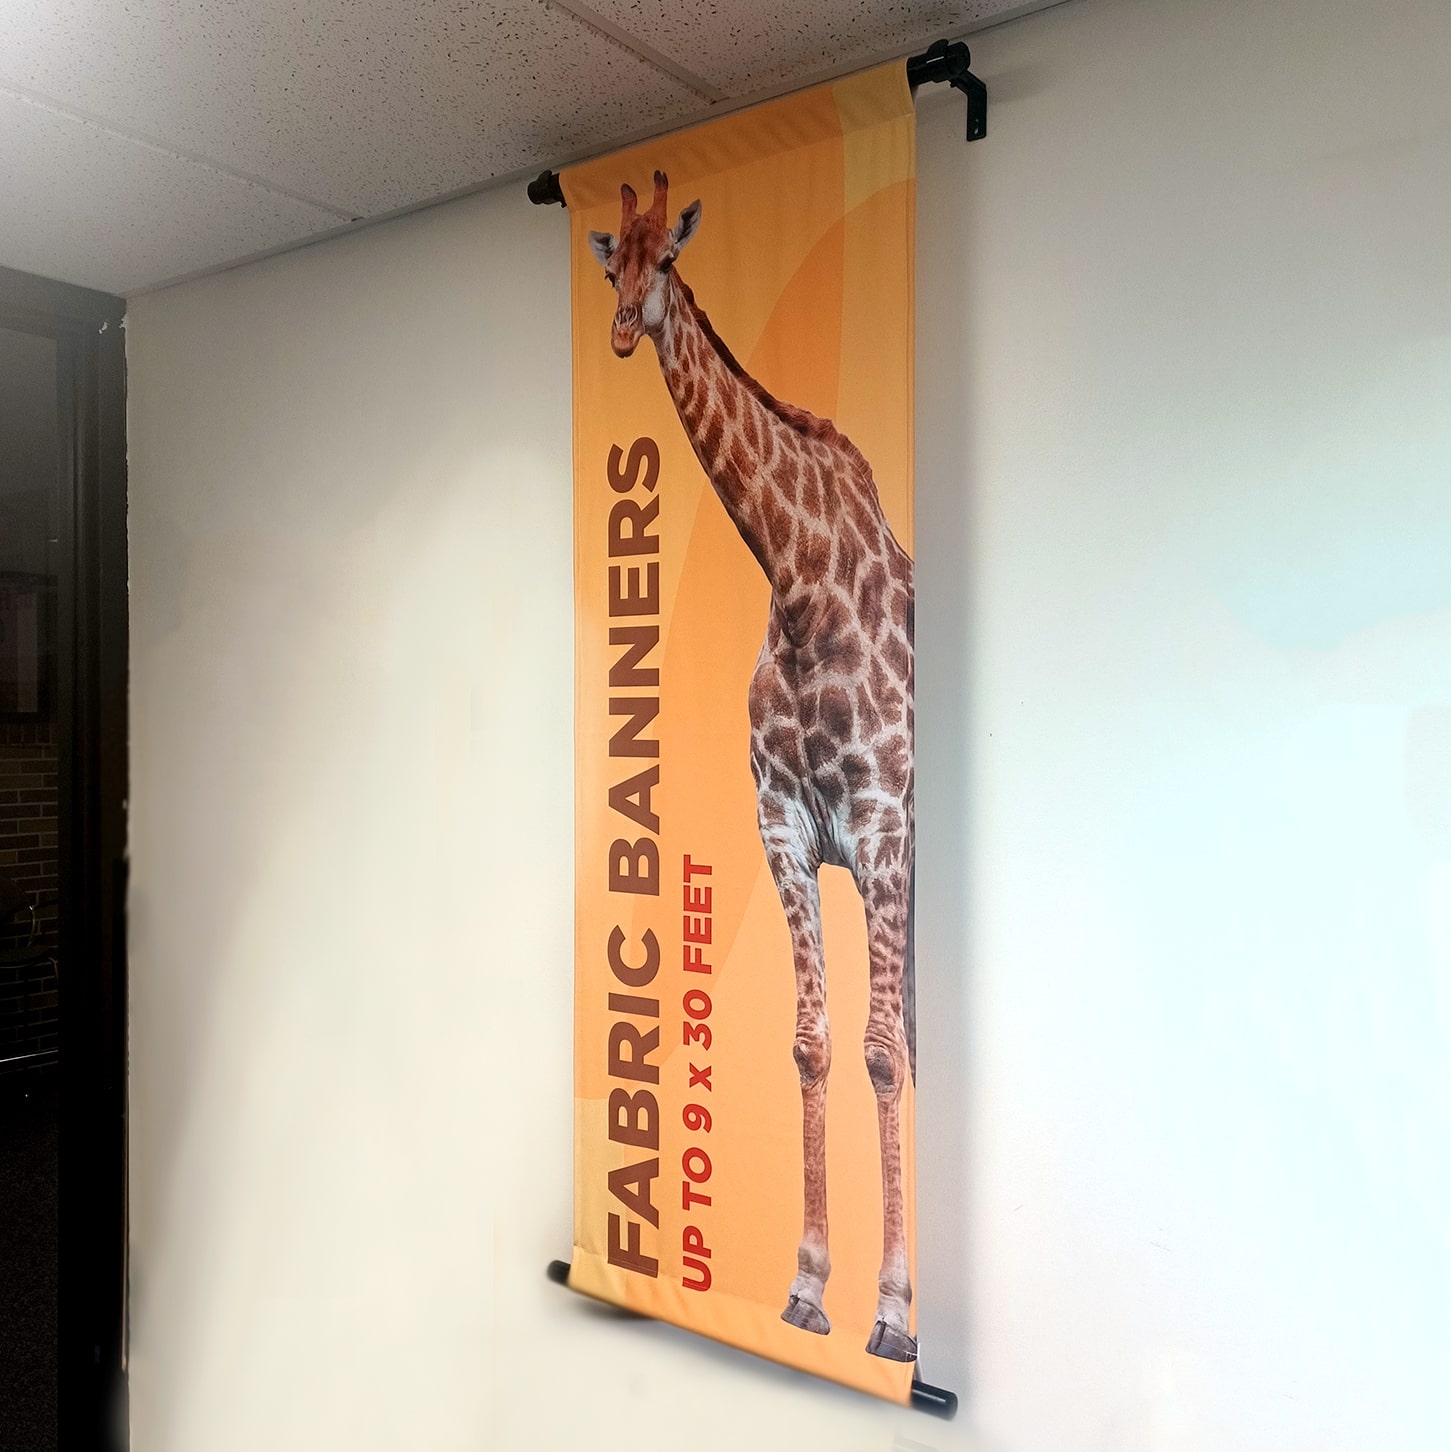 Custom Fabric Banners with Grommets or Pole Pockets, Indoor or Outdoor, Full-Color, Made in Grand Rapids MI - Phase3Graphics.com